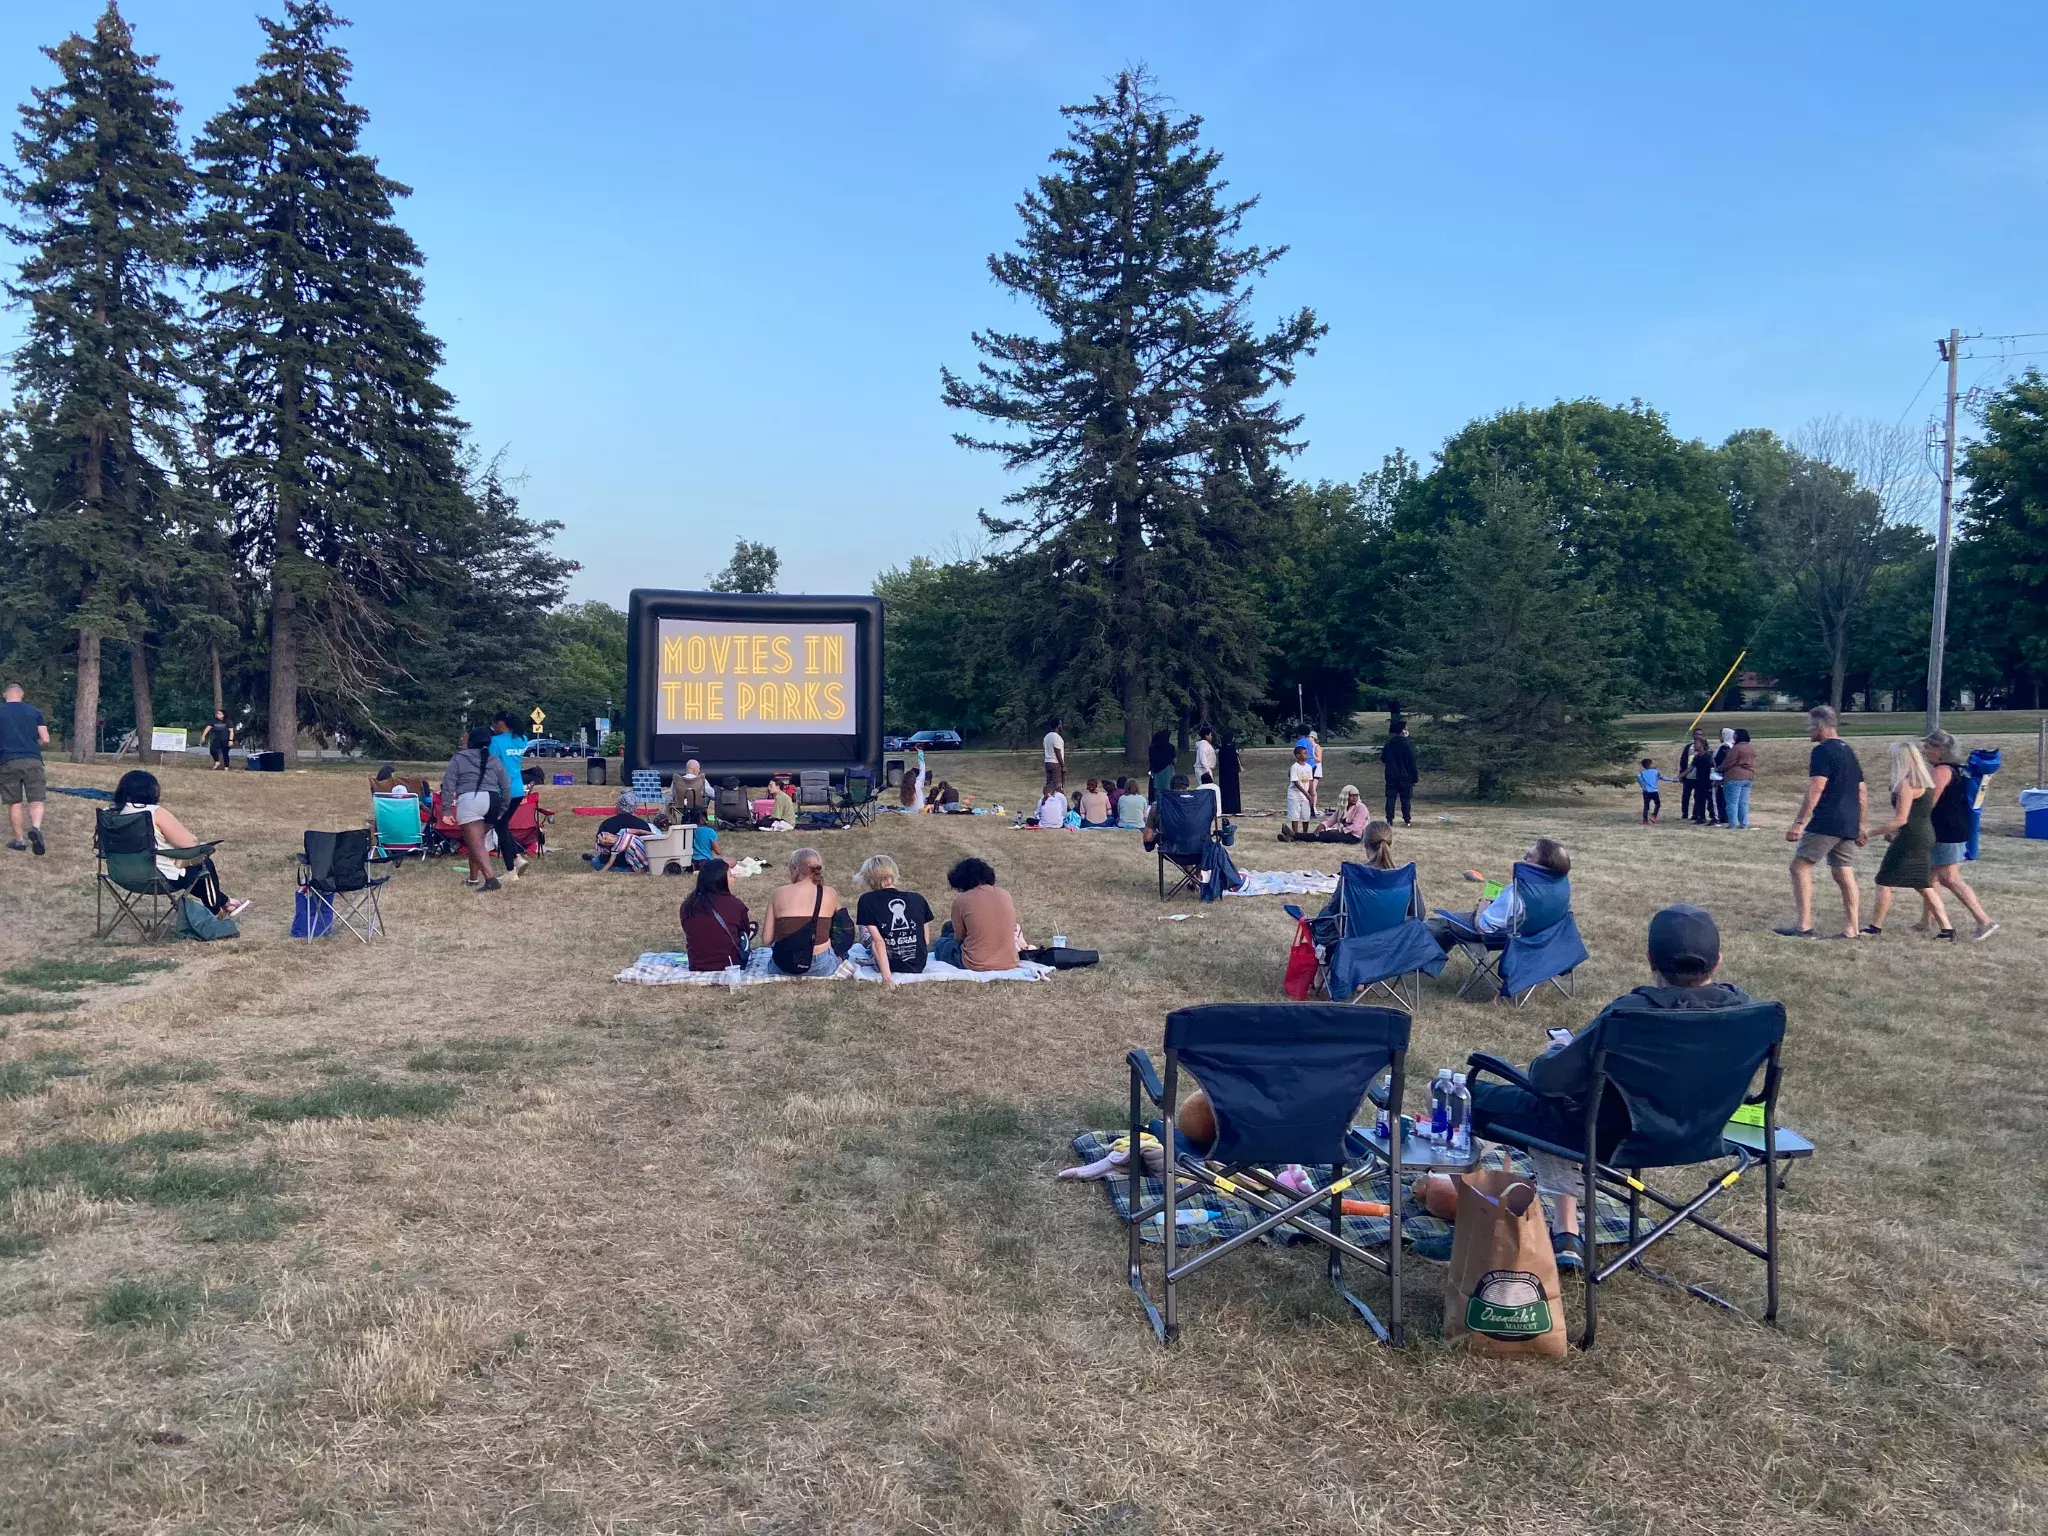 People gathered on a grassy lawn in front of an outdoor movie screen that reads "Movies in the Parks".